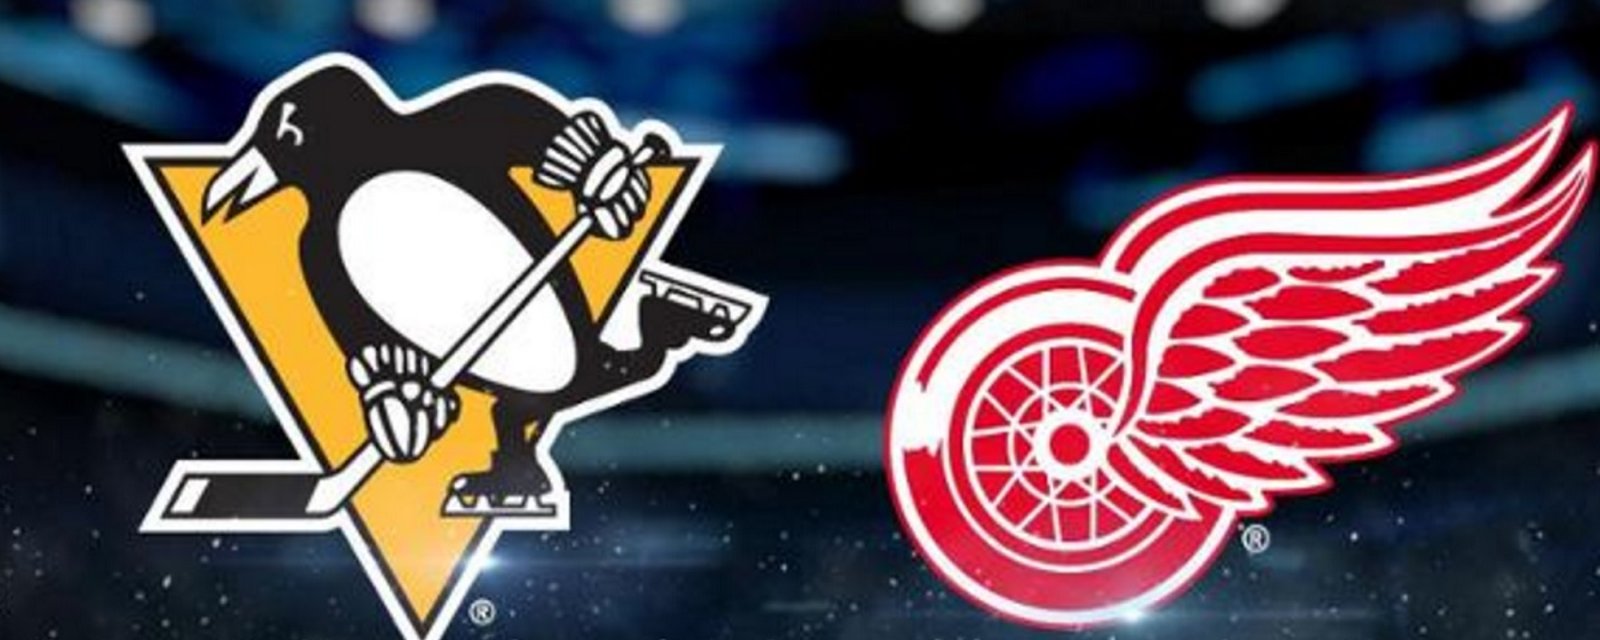 Rumor of a potential trade between the Penguins and Red Wings.